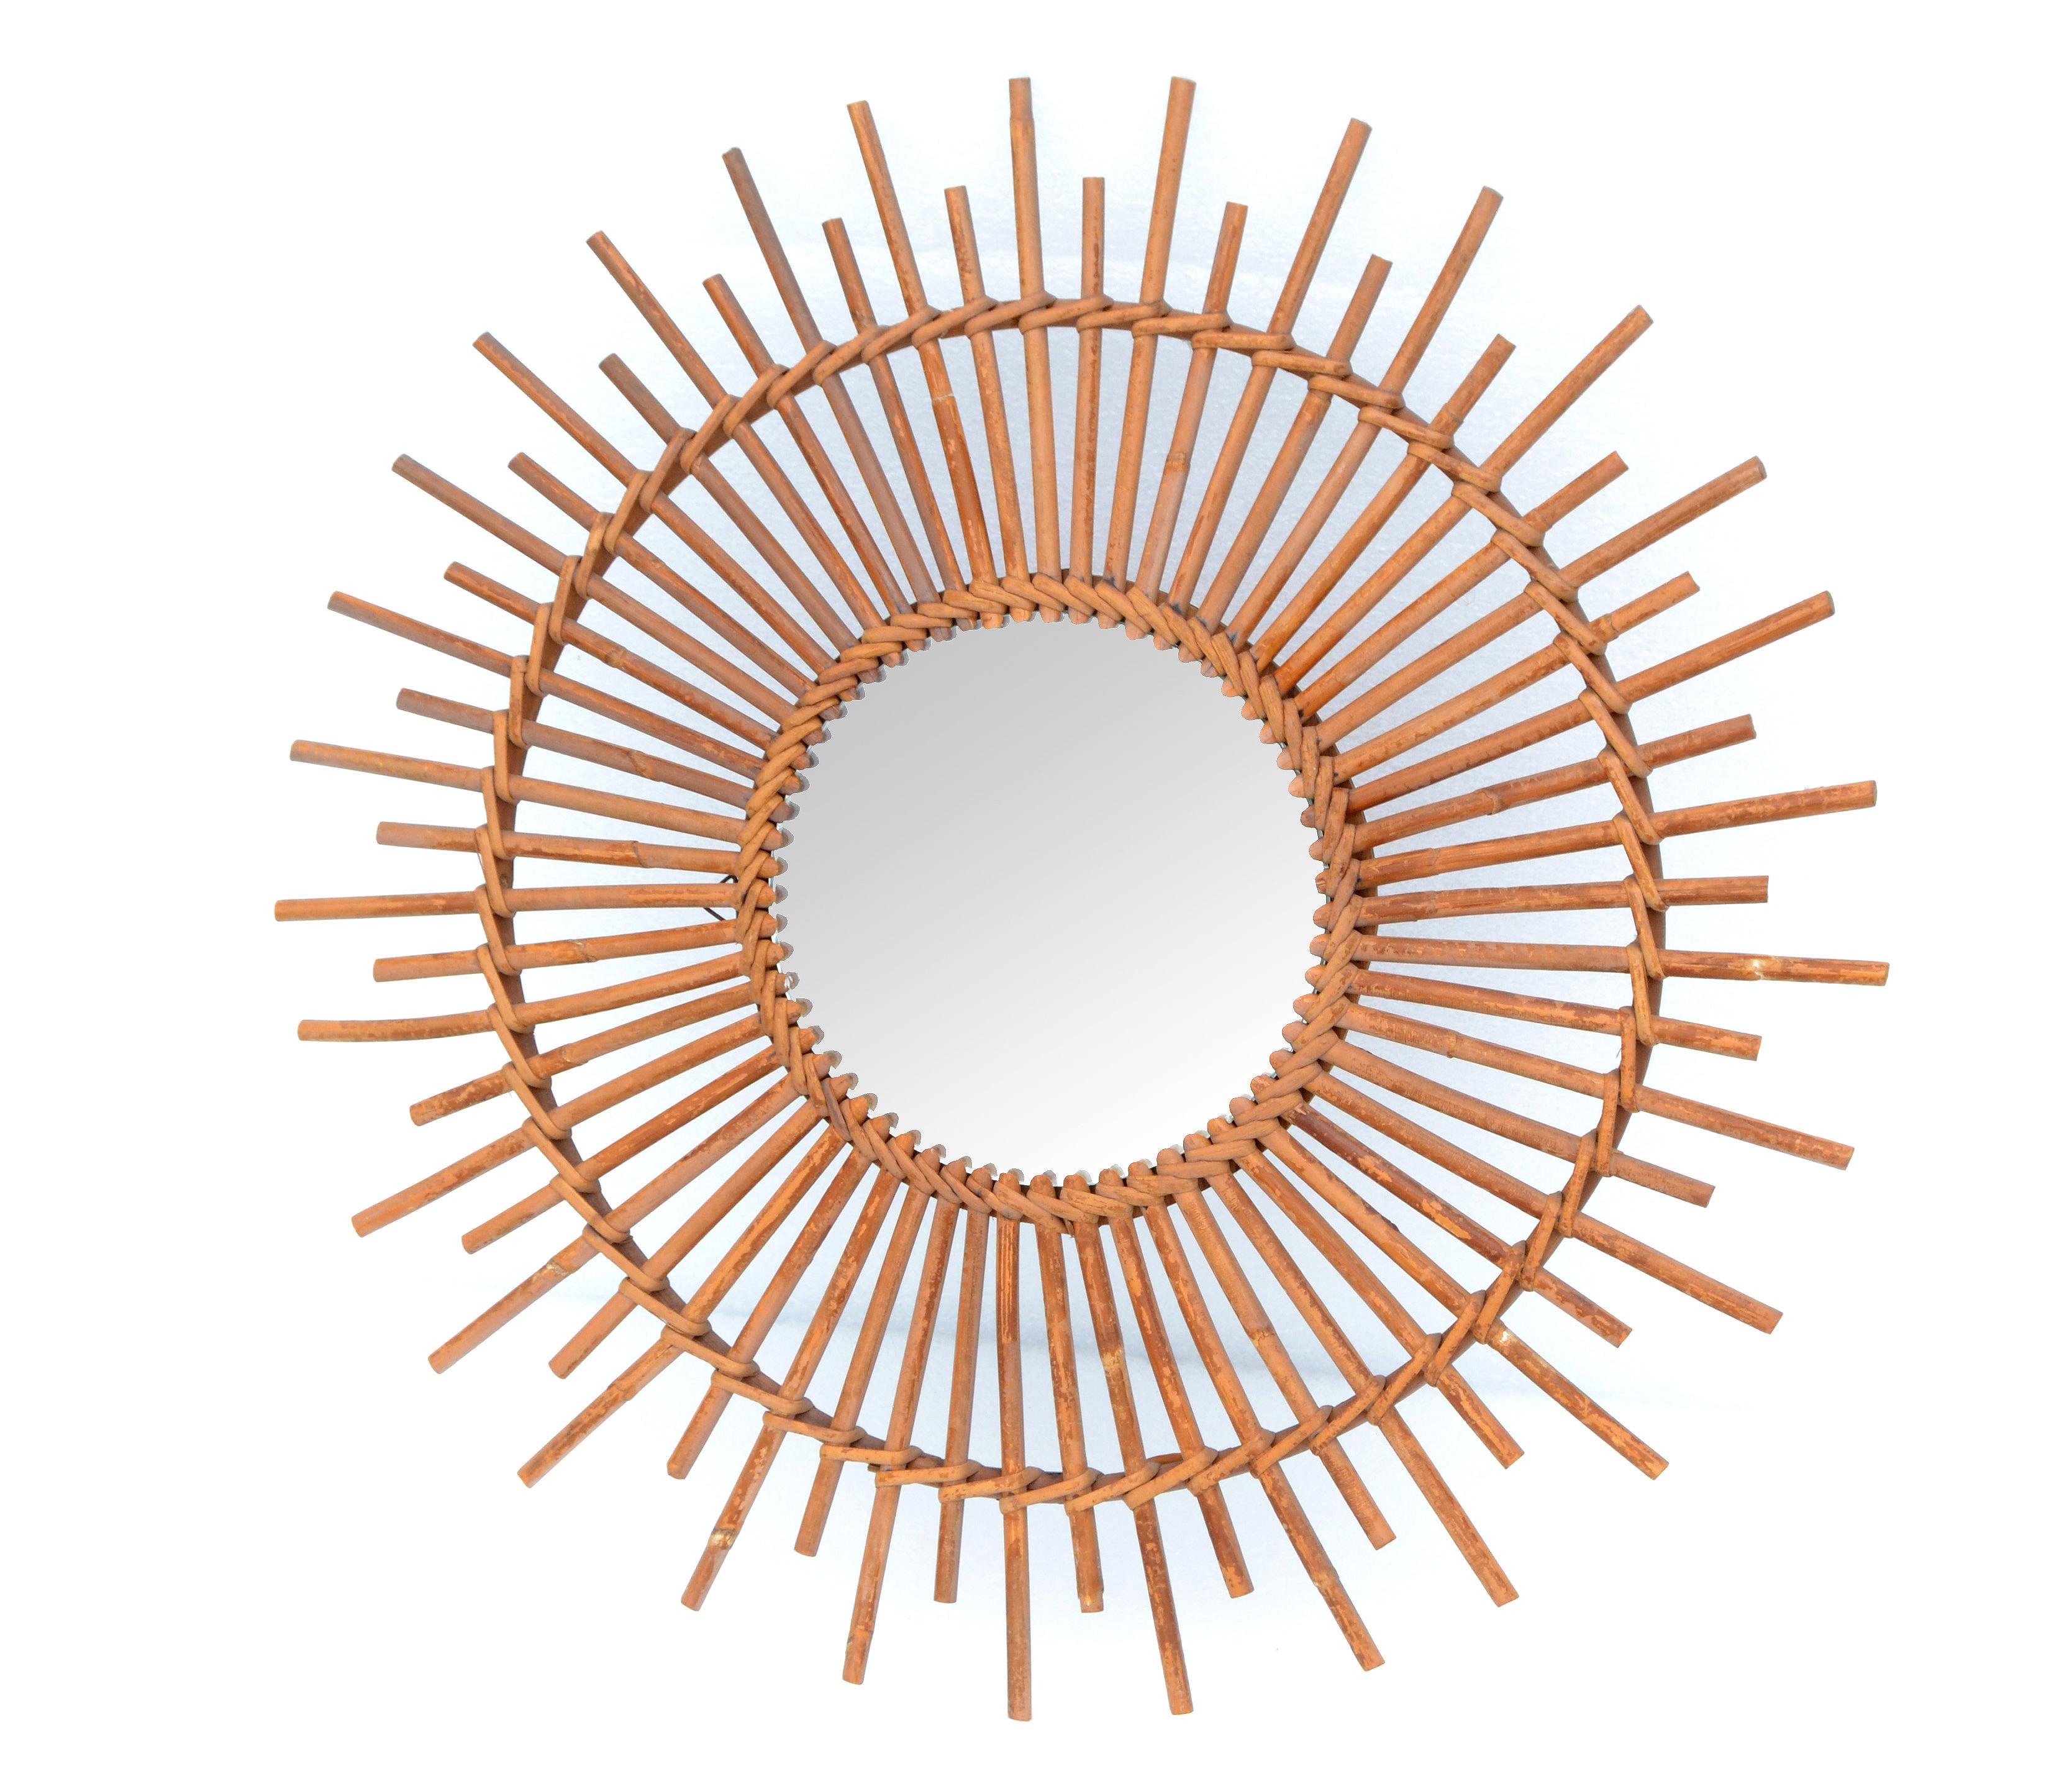 French boho chic round handcrafted wall mirror made out of ficks reed and woven by Wicker.
Made in France in the 1970s.
Diameter of mirror glass measures 8 inches.
Mid-Century Modern design for your sun room.